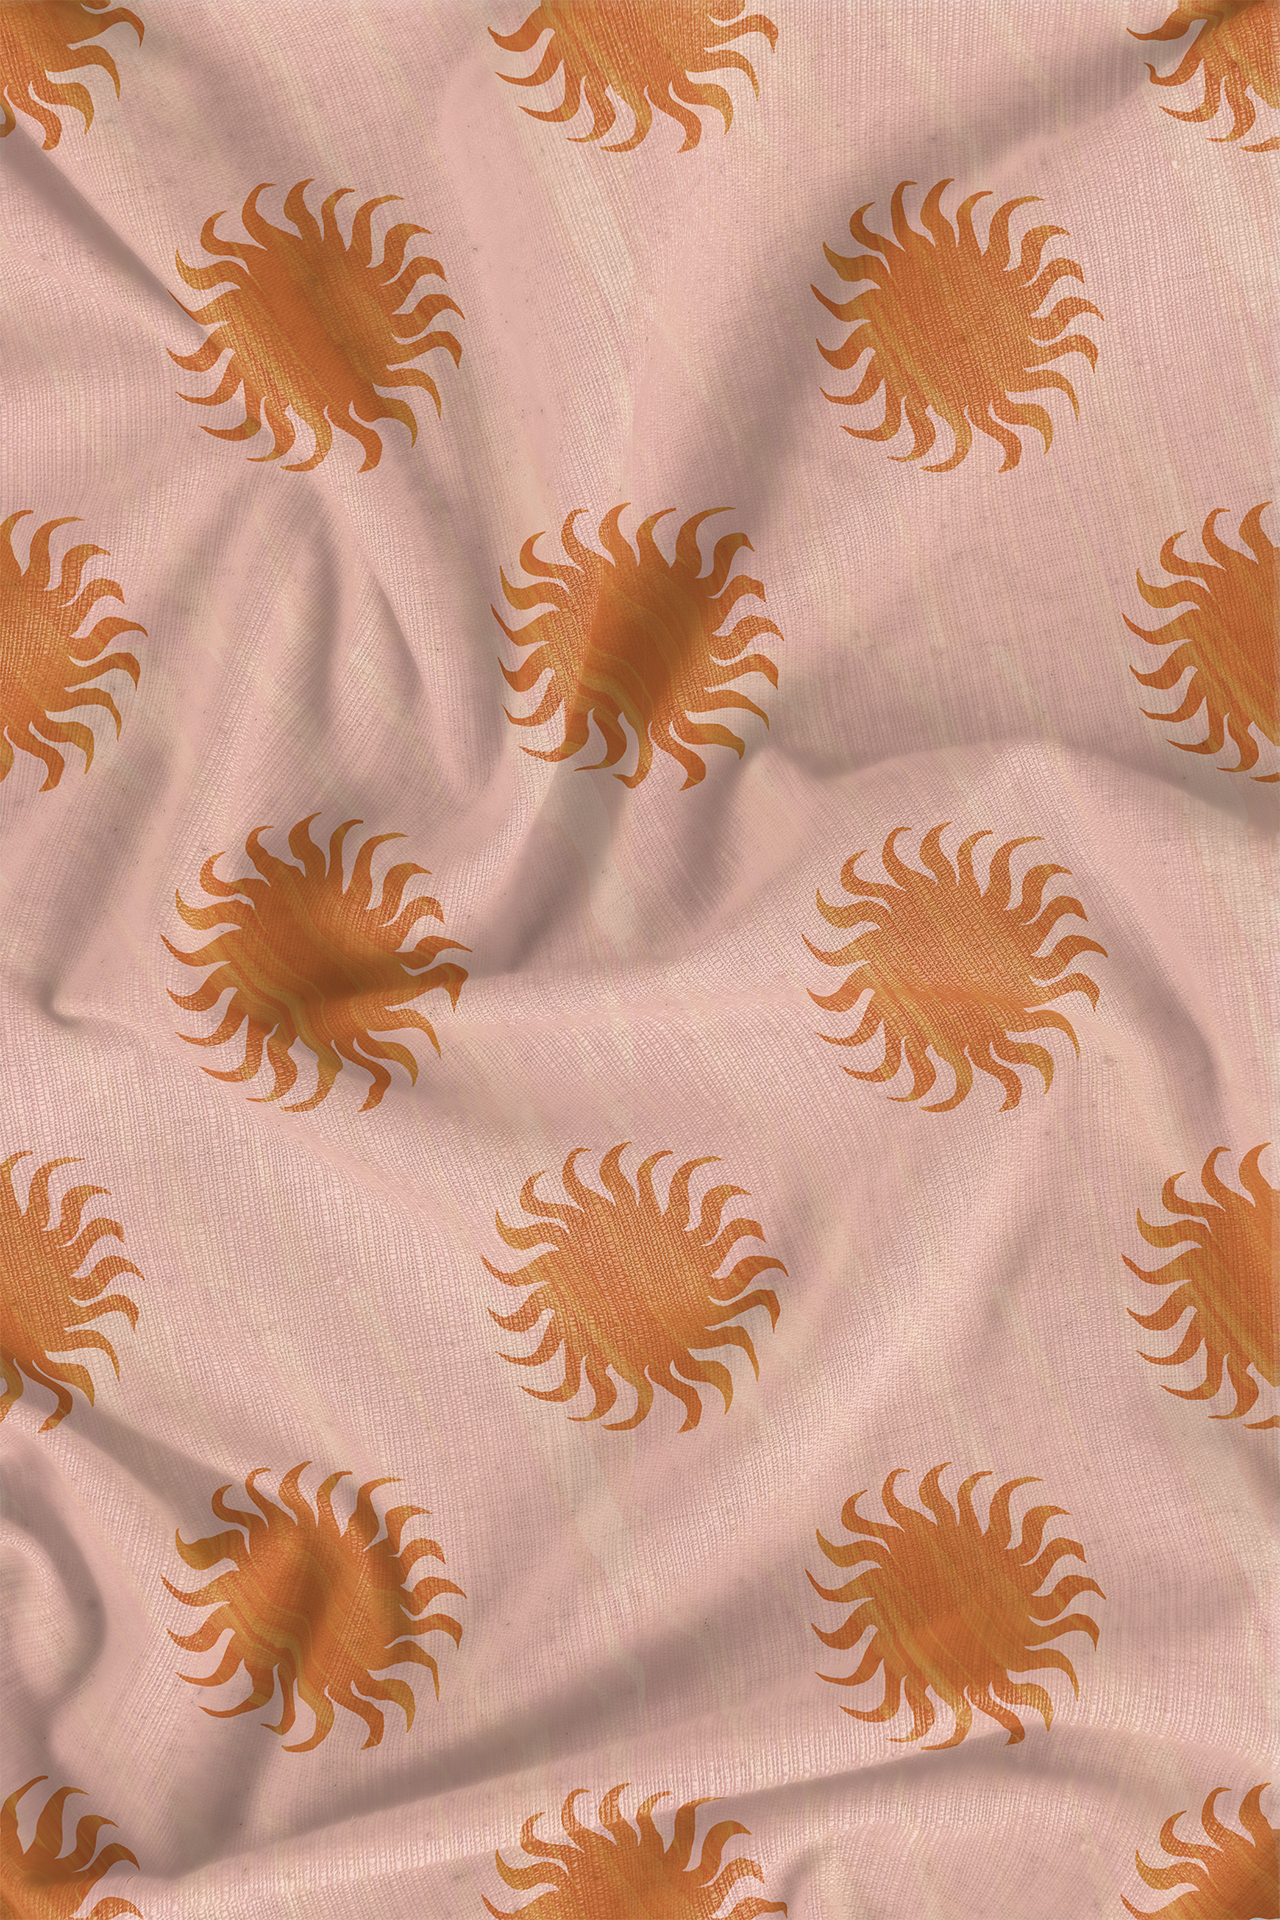 Sol pattern_examples_FABRIC texture_website_pink & burnt orange.png